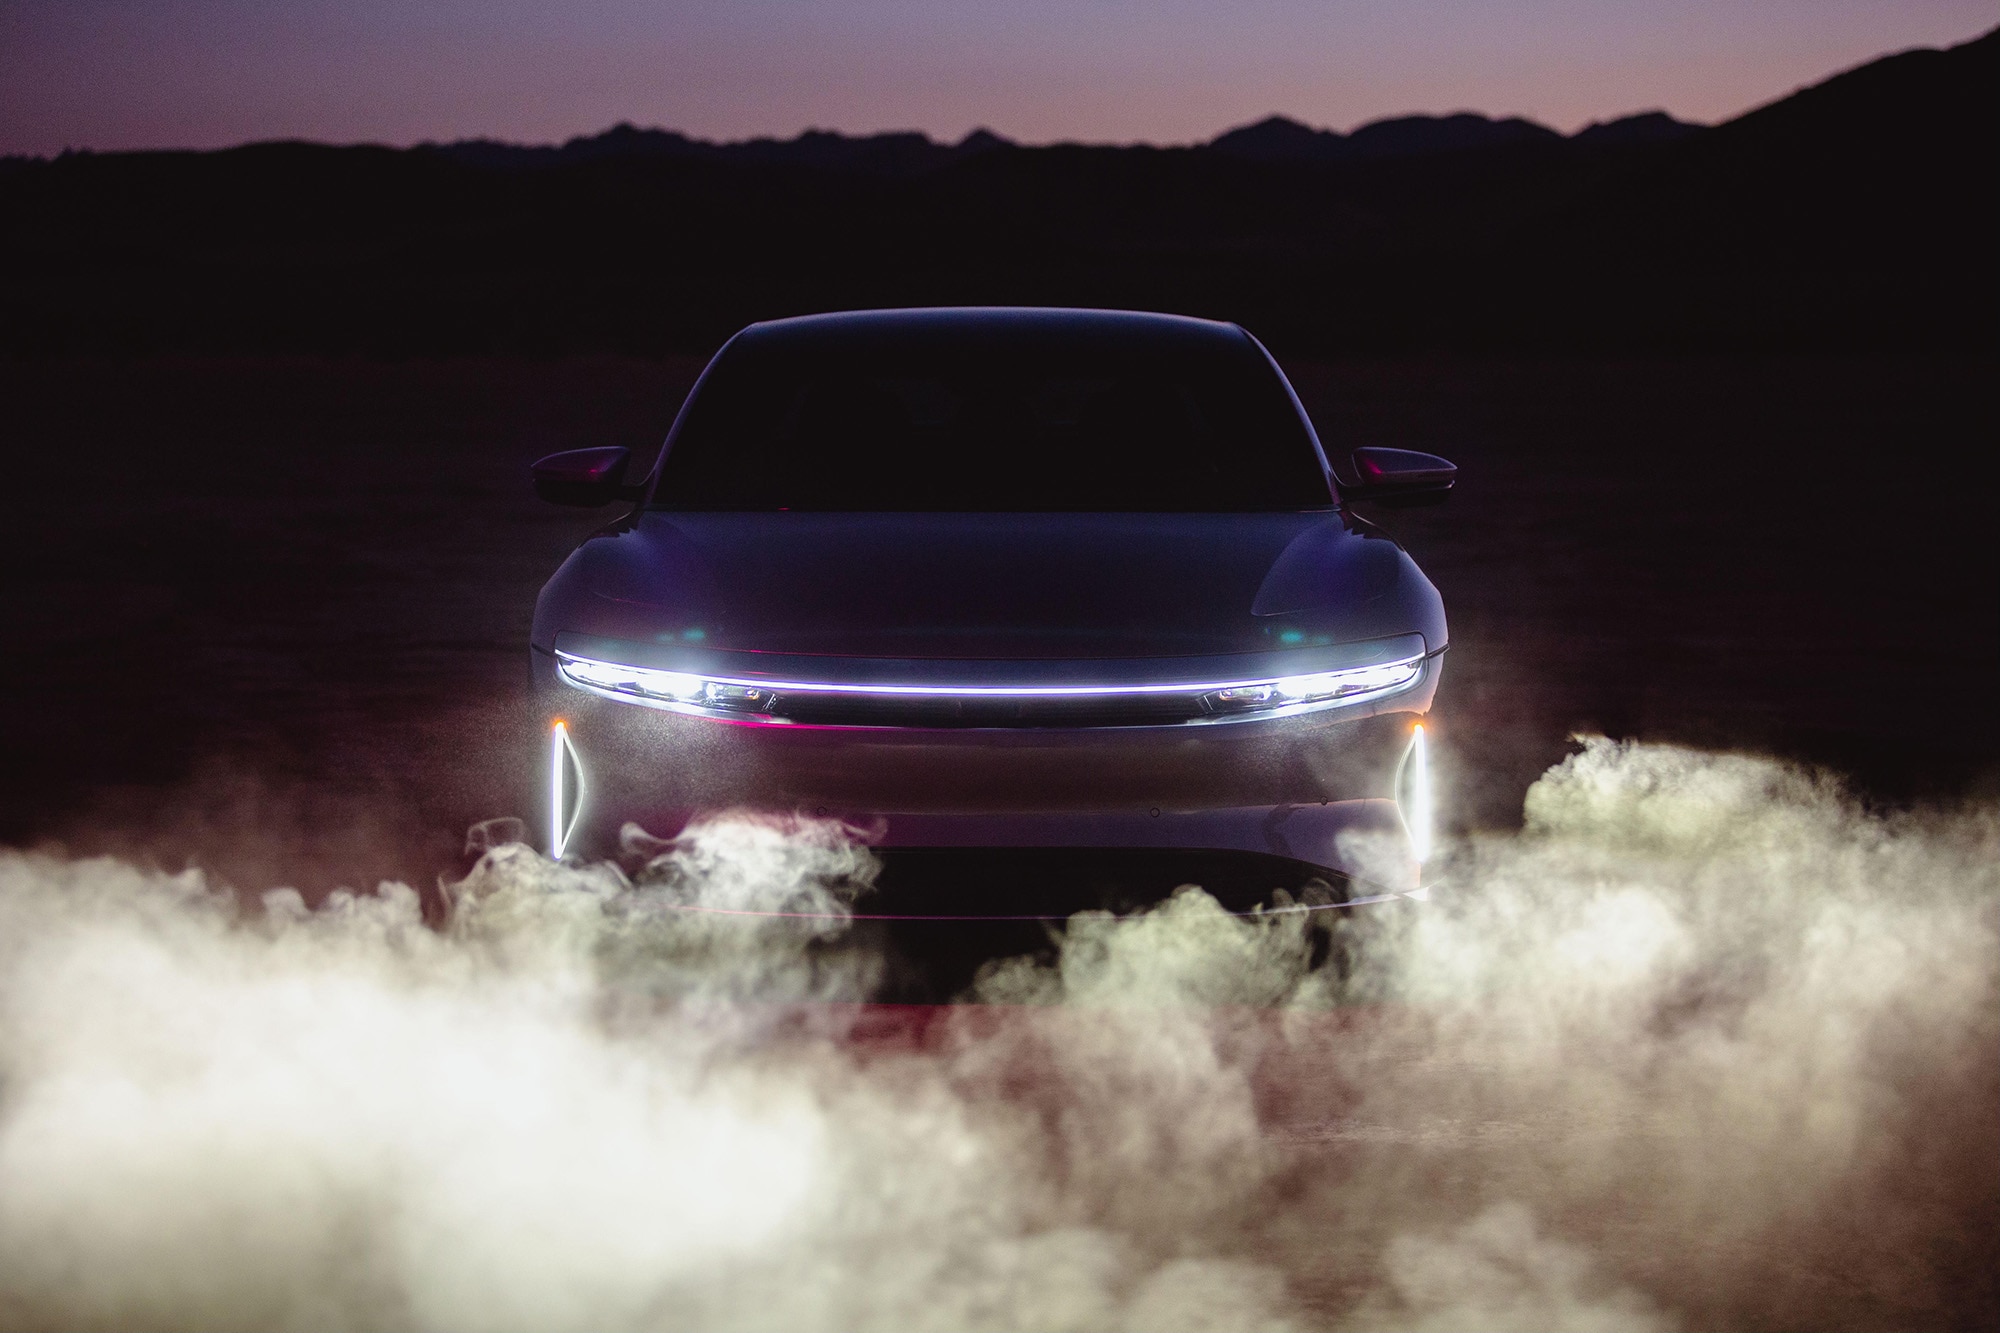 An electric car shines its headlights through a cloud of dust.